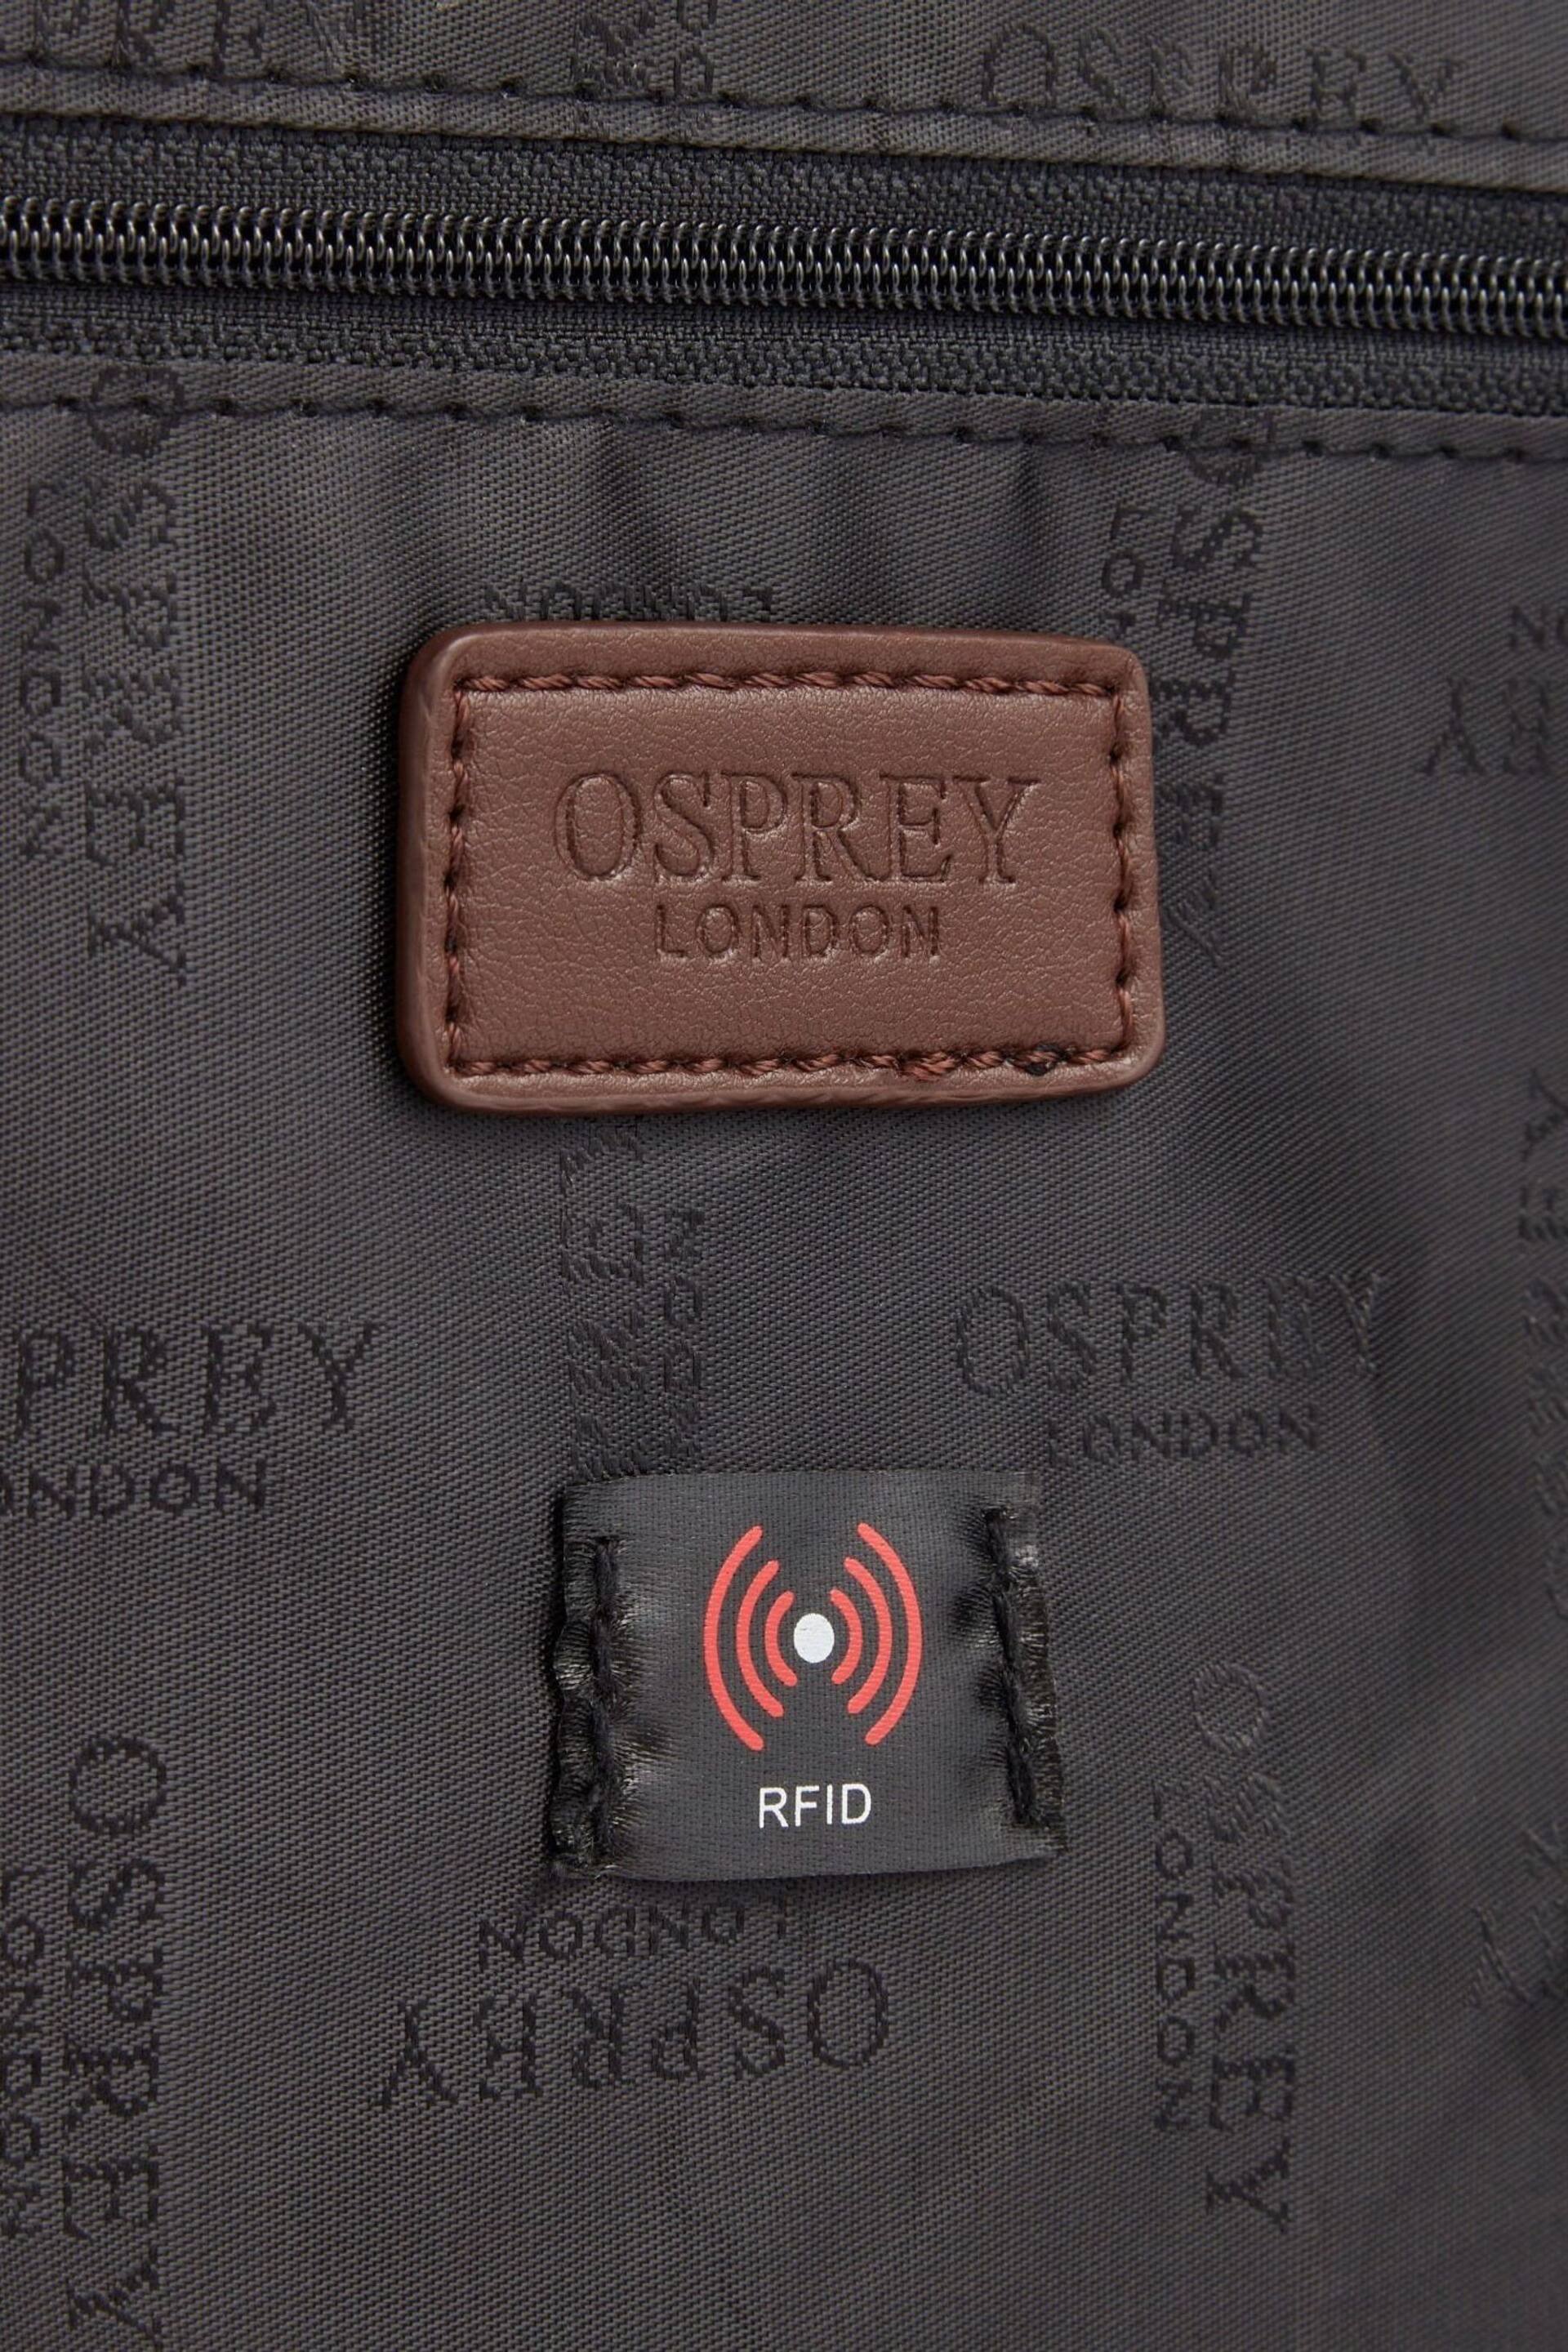 OSPREY LONDON The Wanderer Nylon Tote Bag With RFID Protection - Image 5 of 5